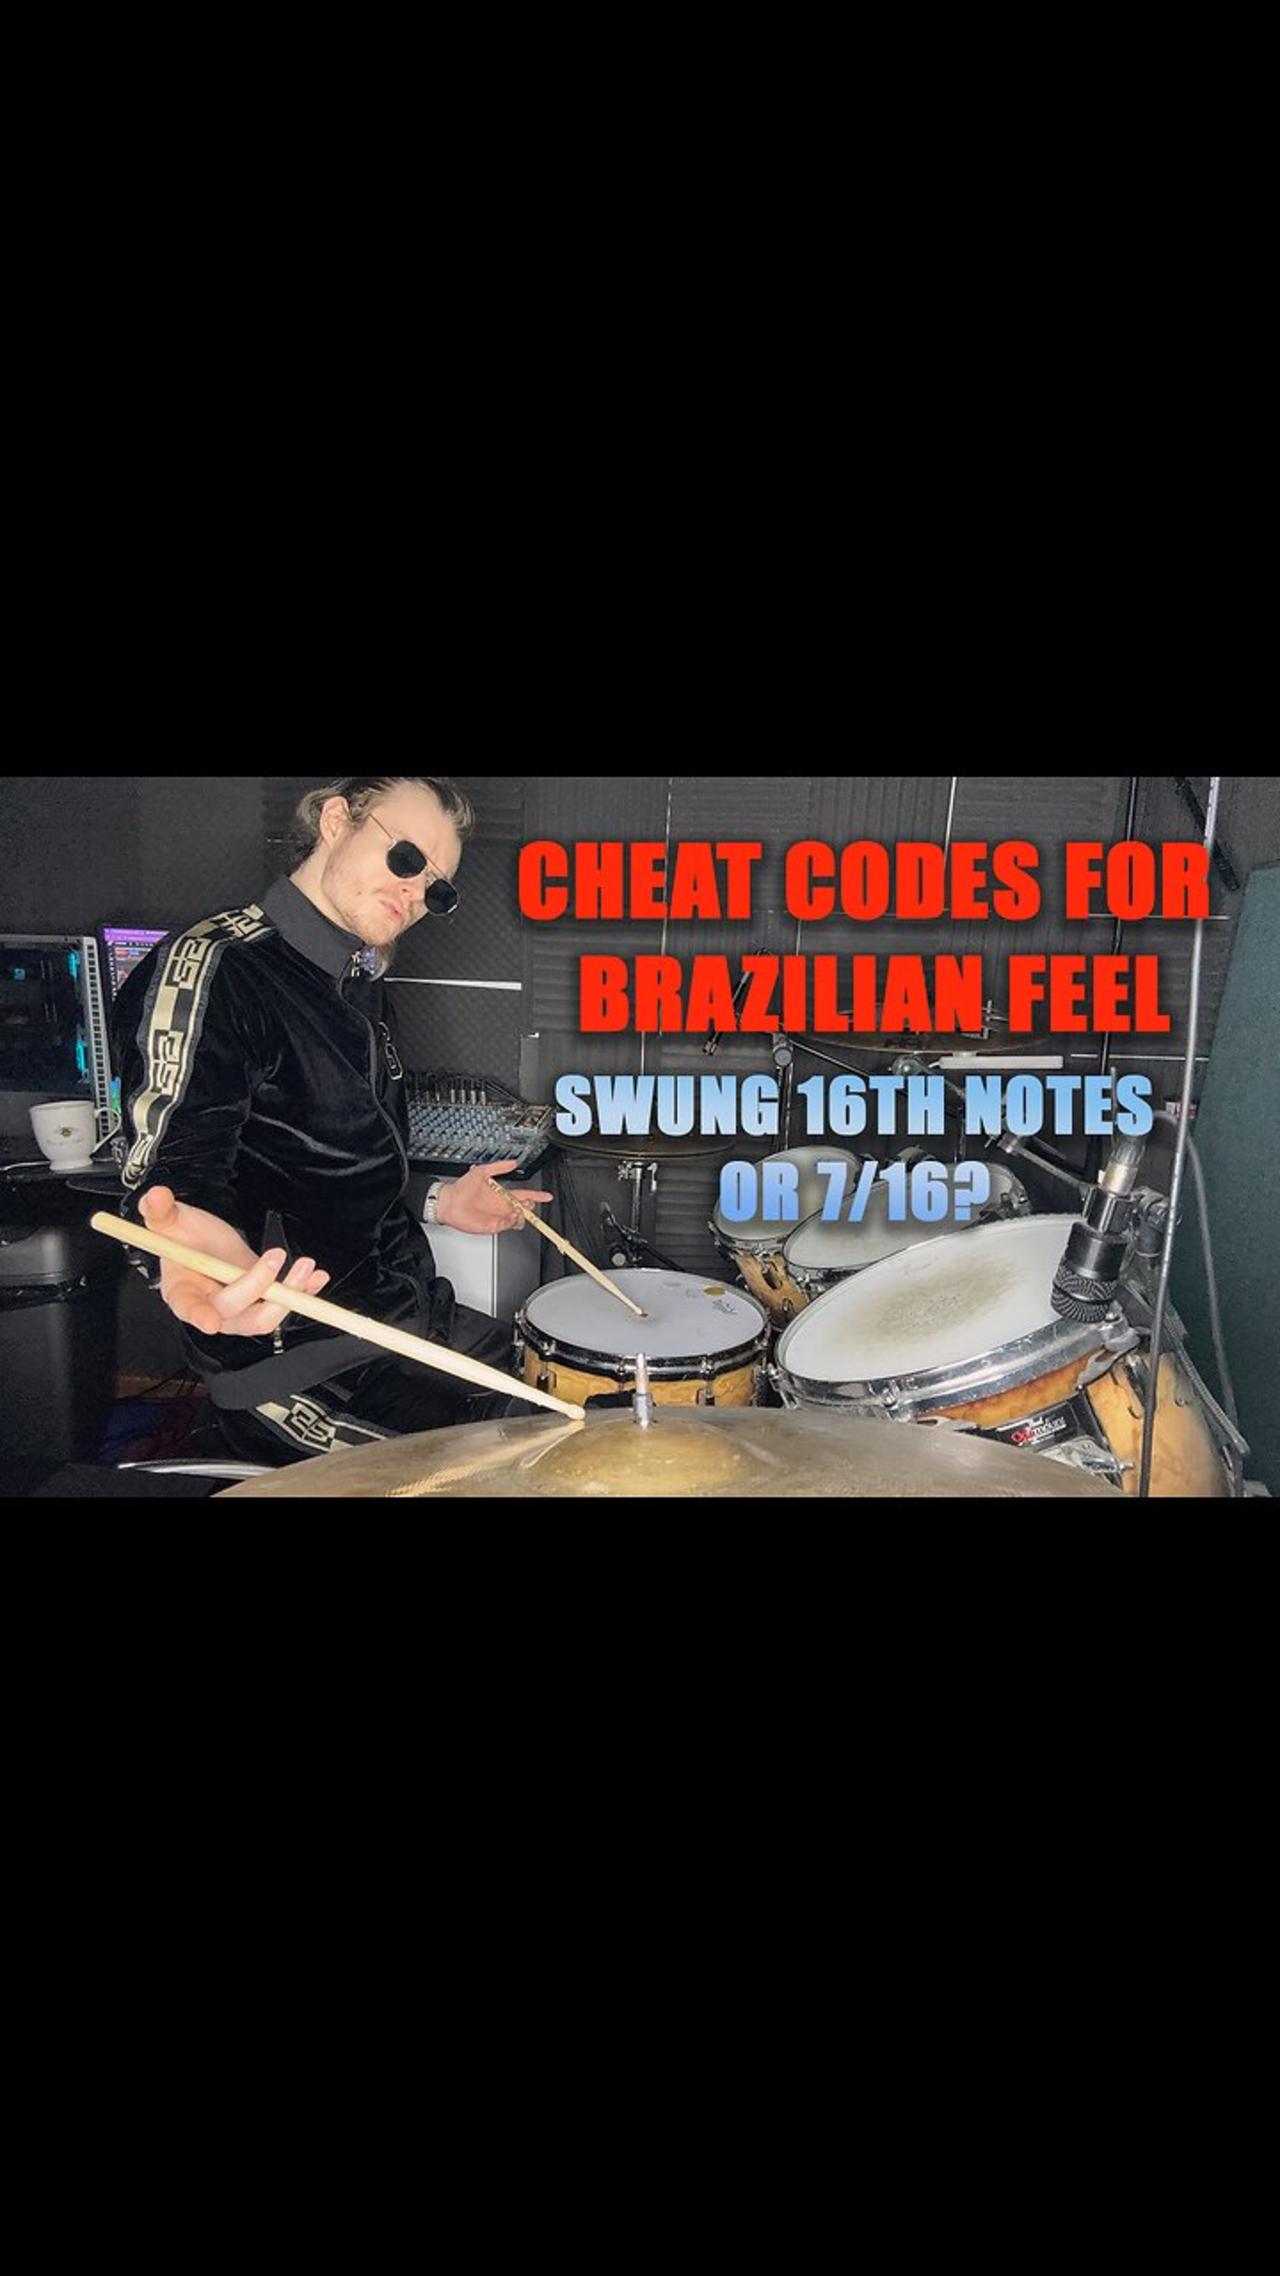 Swing 16th Notes. Cheat Codes For Brazilian feel